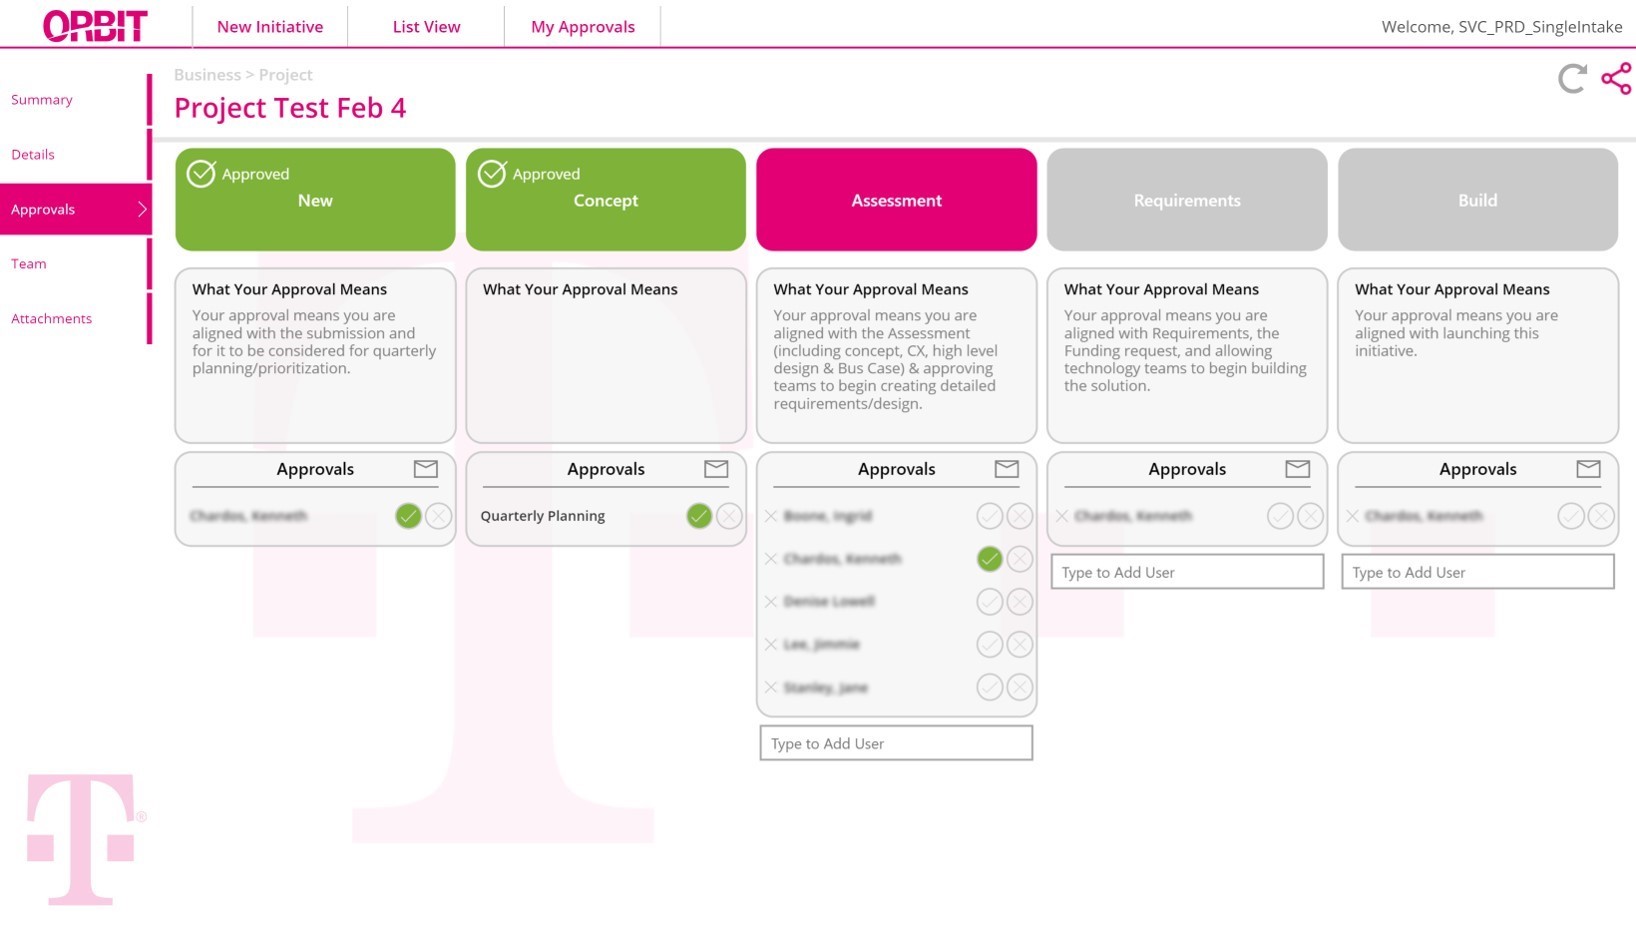 Screenshot of the T-Mobile Orbit canvas app for tracking initiatives and managing a multiple-stage approval process.